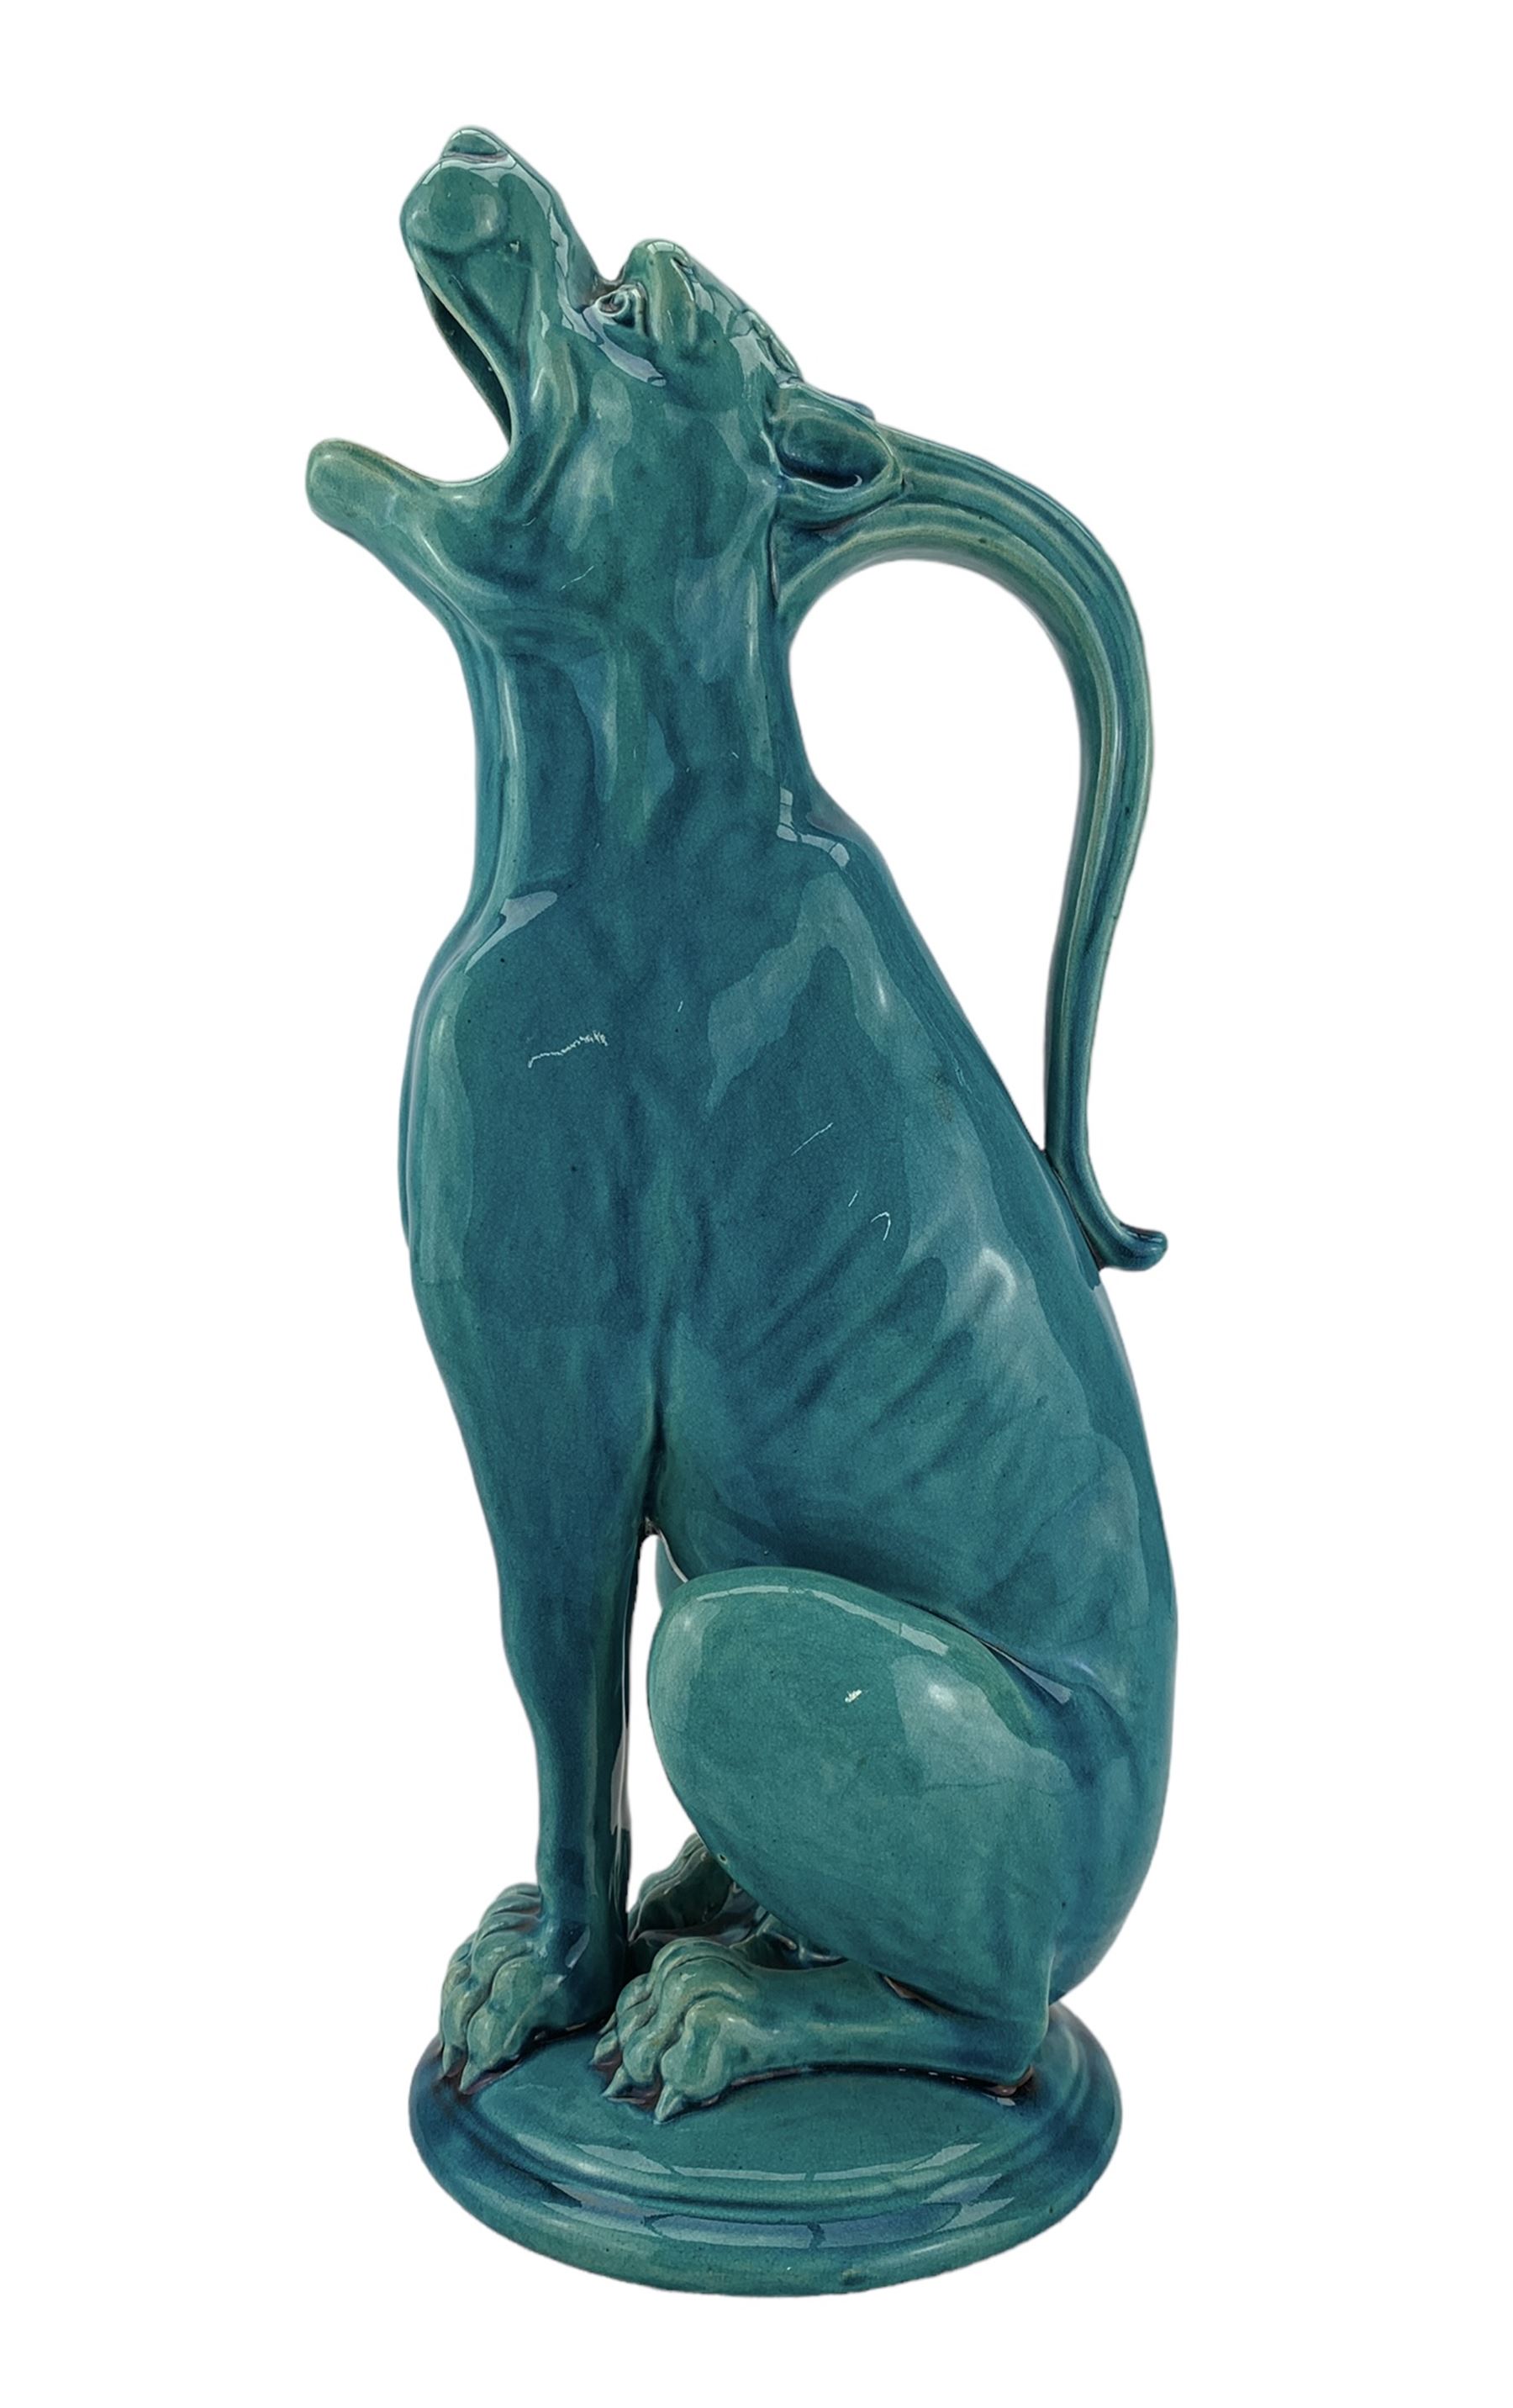 Burmantofts Faience turquoise-glaze ewer modelled as a grotesque hound